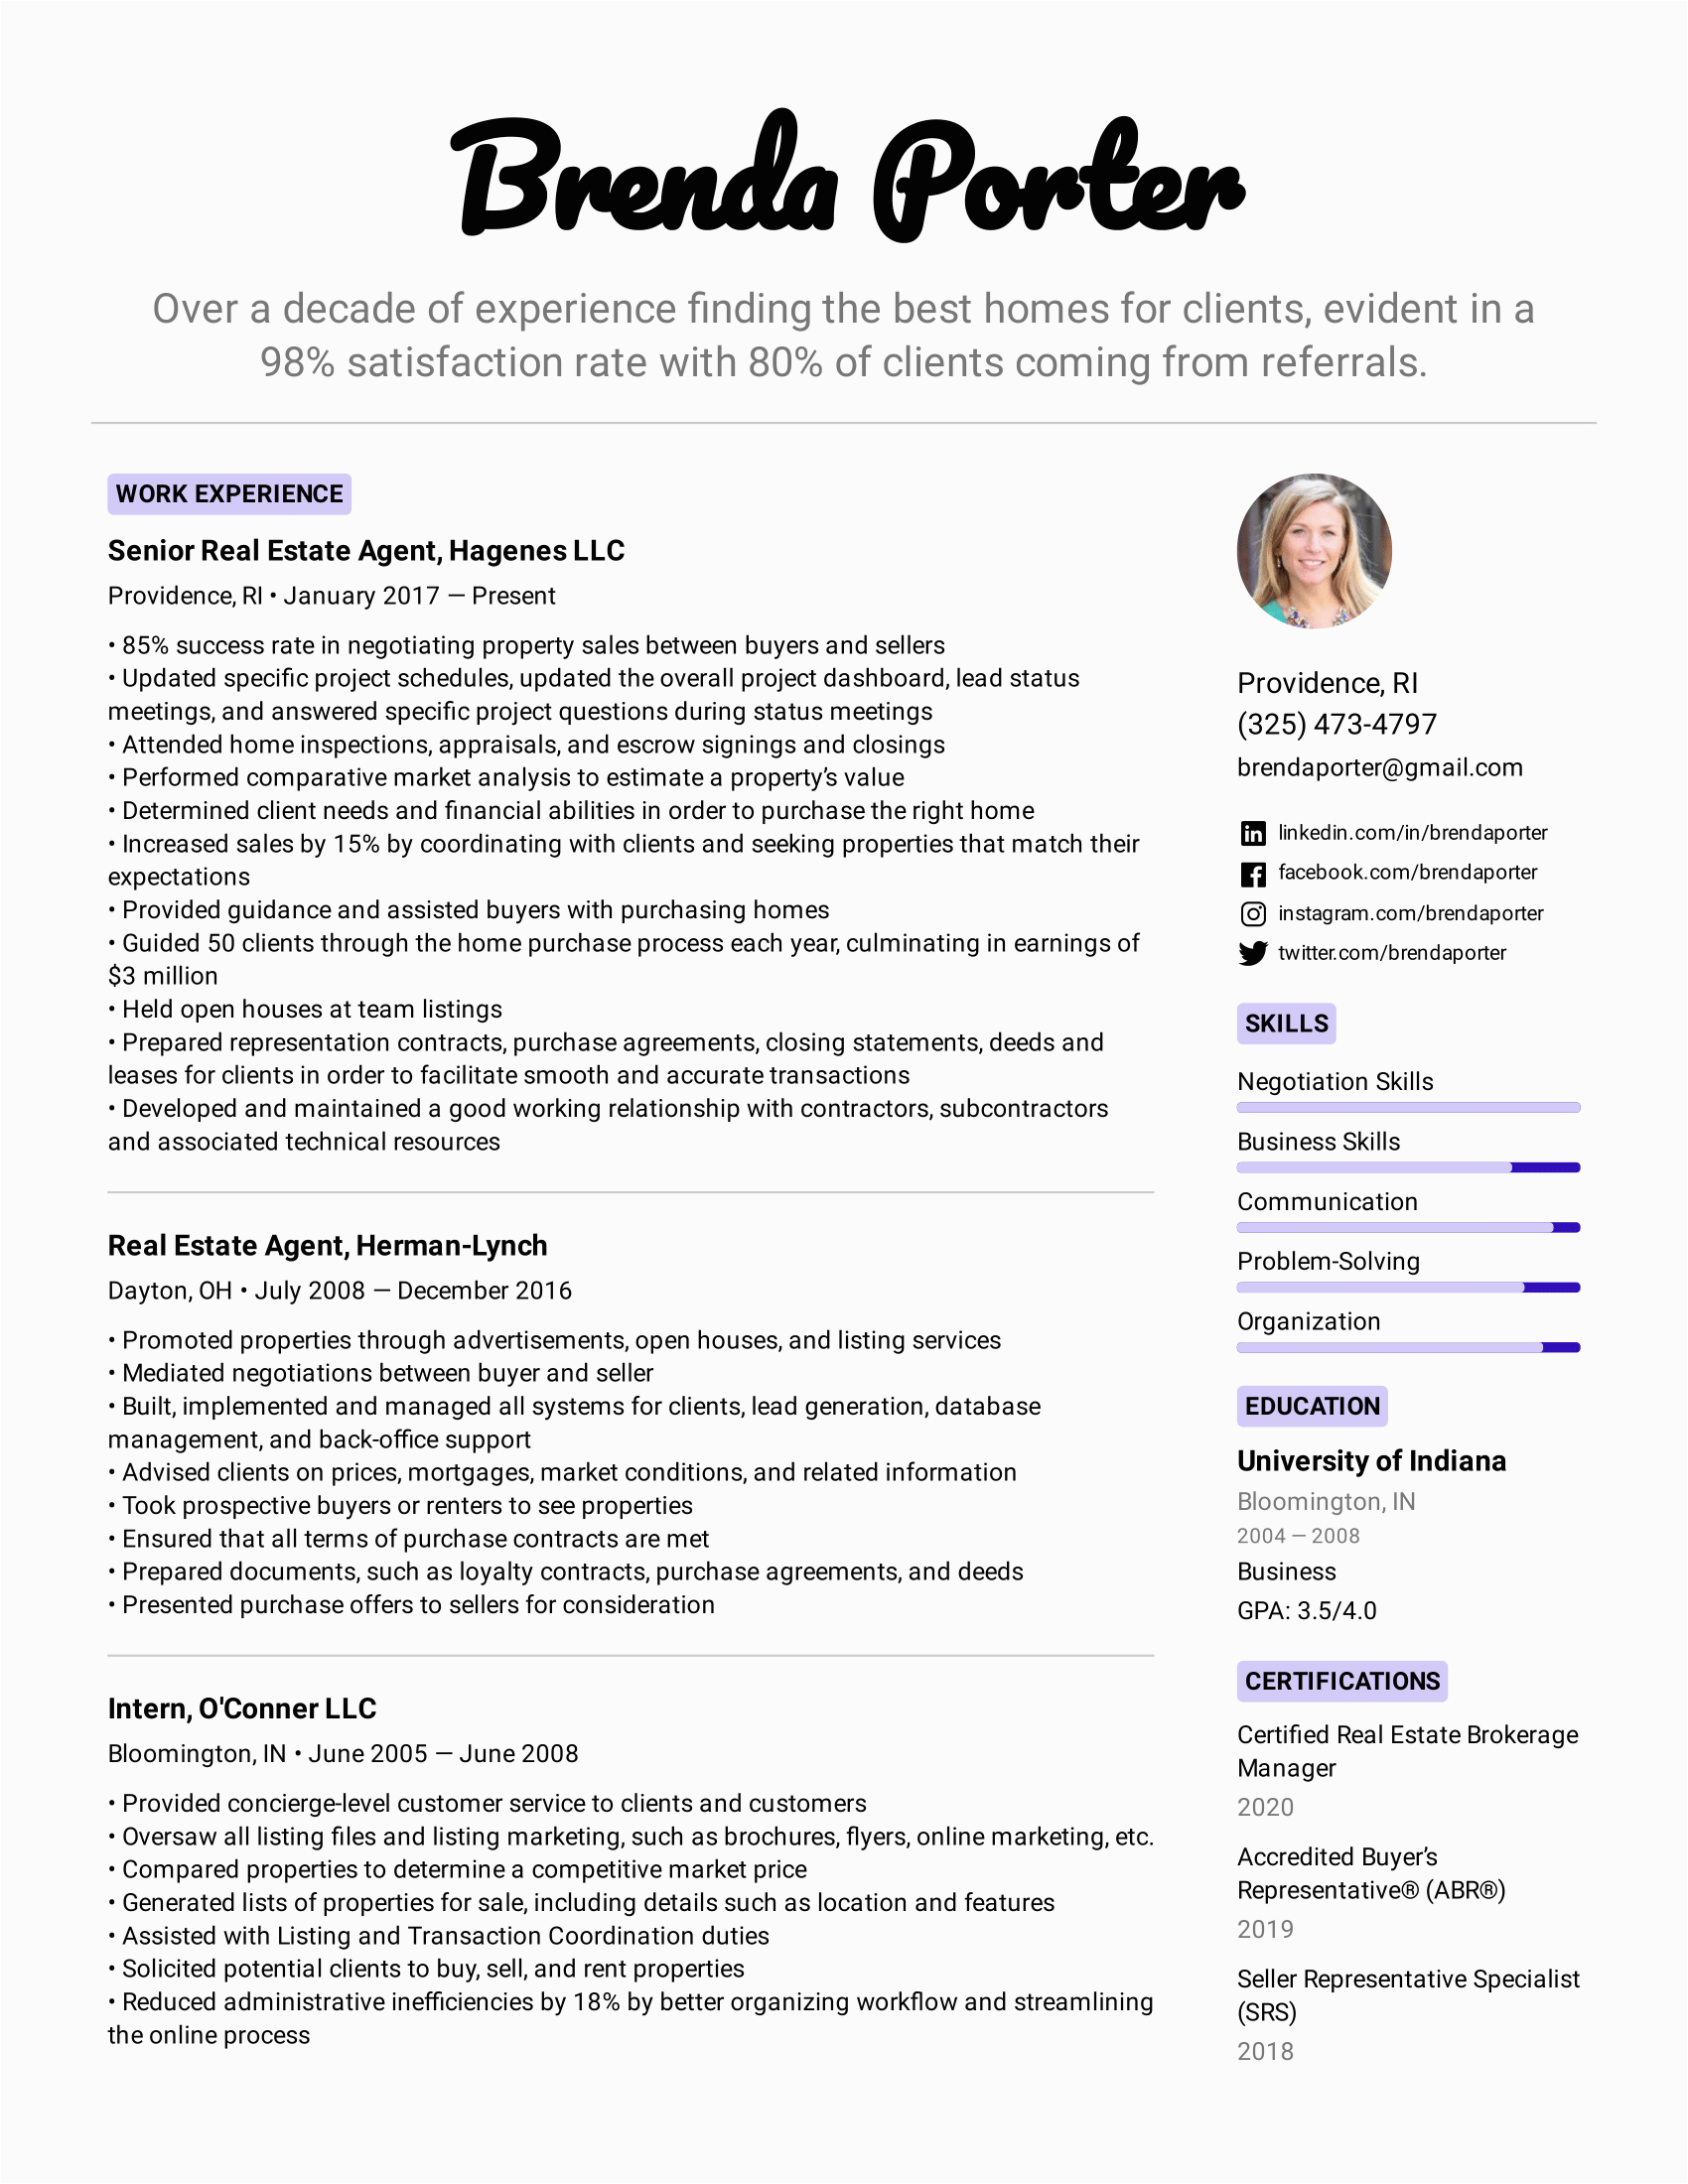 Sample Resume for New Real Estate Agent Real Estate Agent Resume Example & Writing Tips for 2020